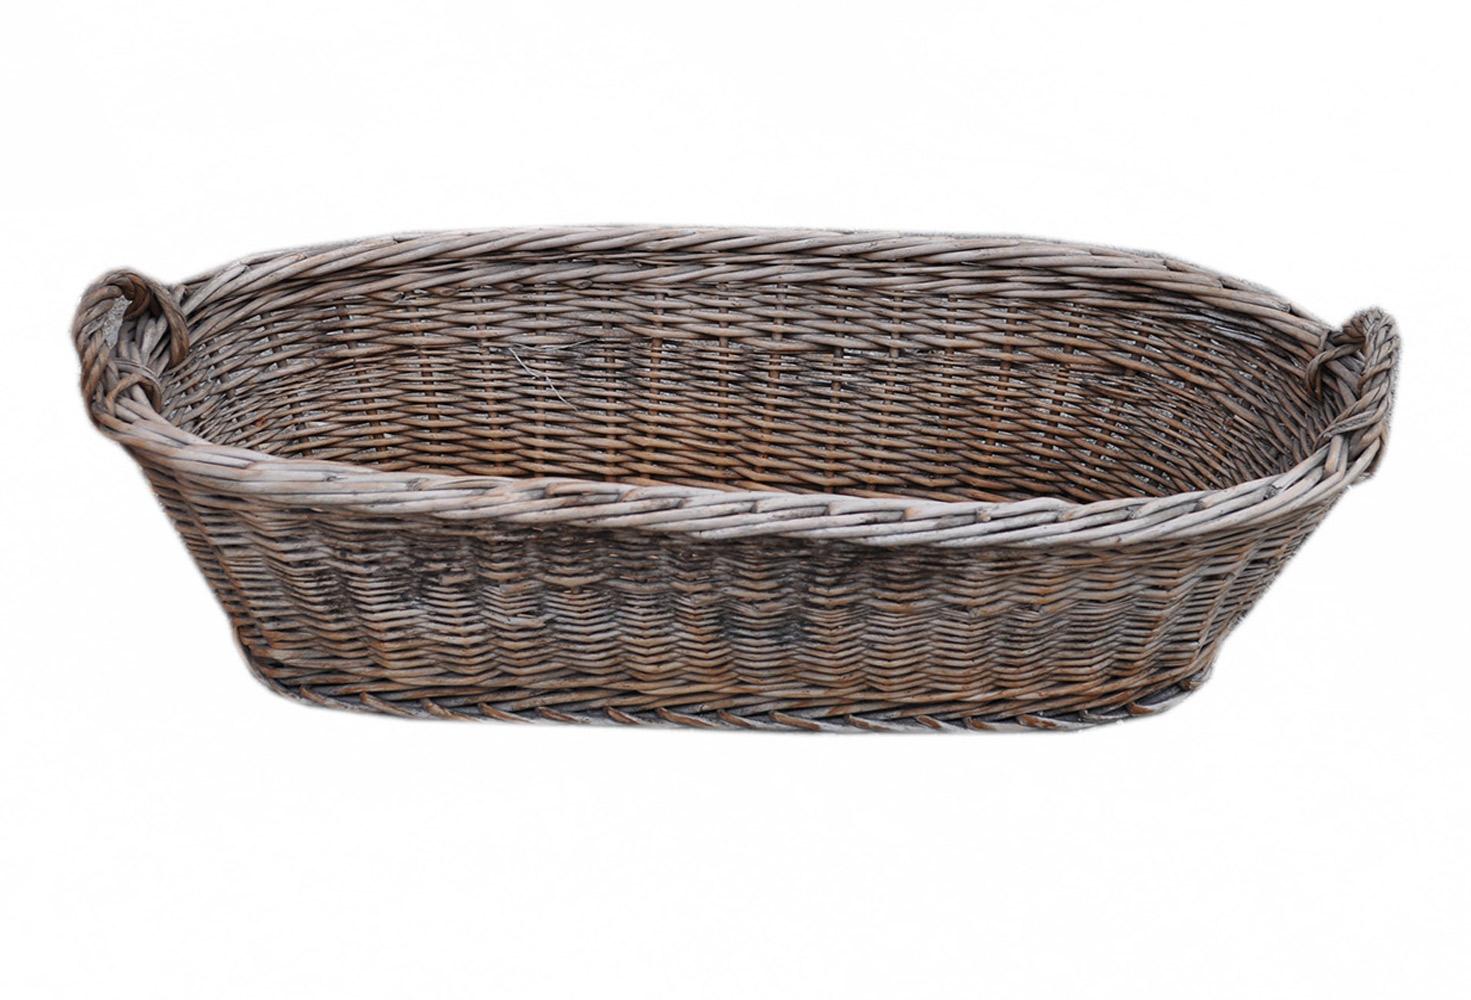 Vintage Baguette basket. Charming handwoven bread basket. Perfect for your Baguette's.
4 Available - Listed price is for one (1) Basket.